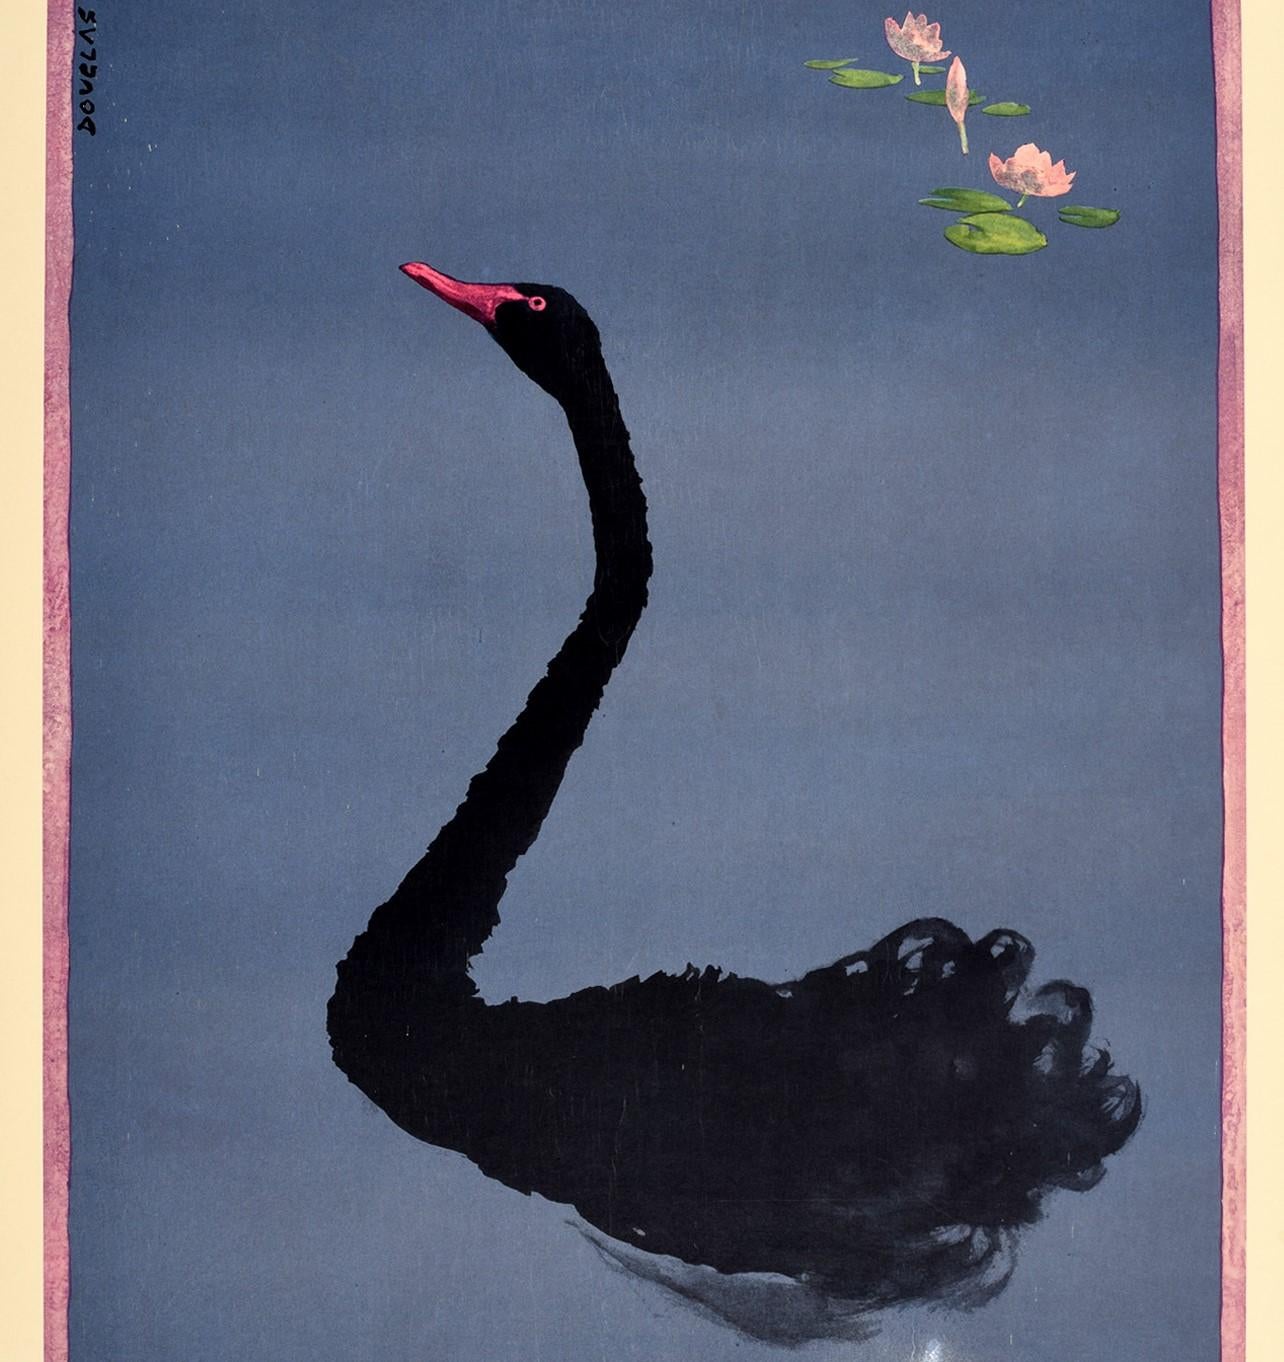 Original vintage sport travel poster for the Commonwealth Games Perth Australia 22 November-1 December 1962 featuring a great design by the Australian artist Douglas Annand (1903-1976) of water lilies and an elegant black swan against the blue